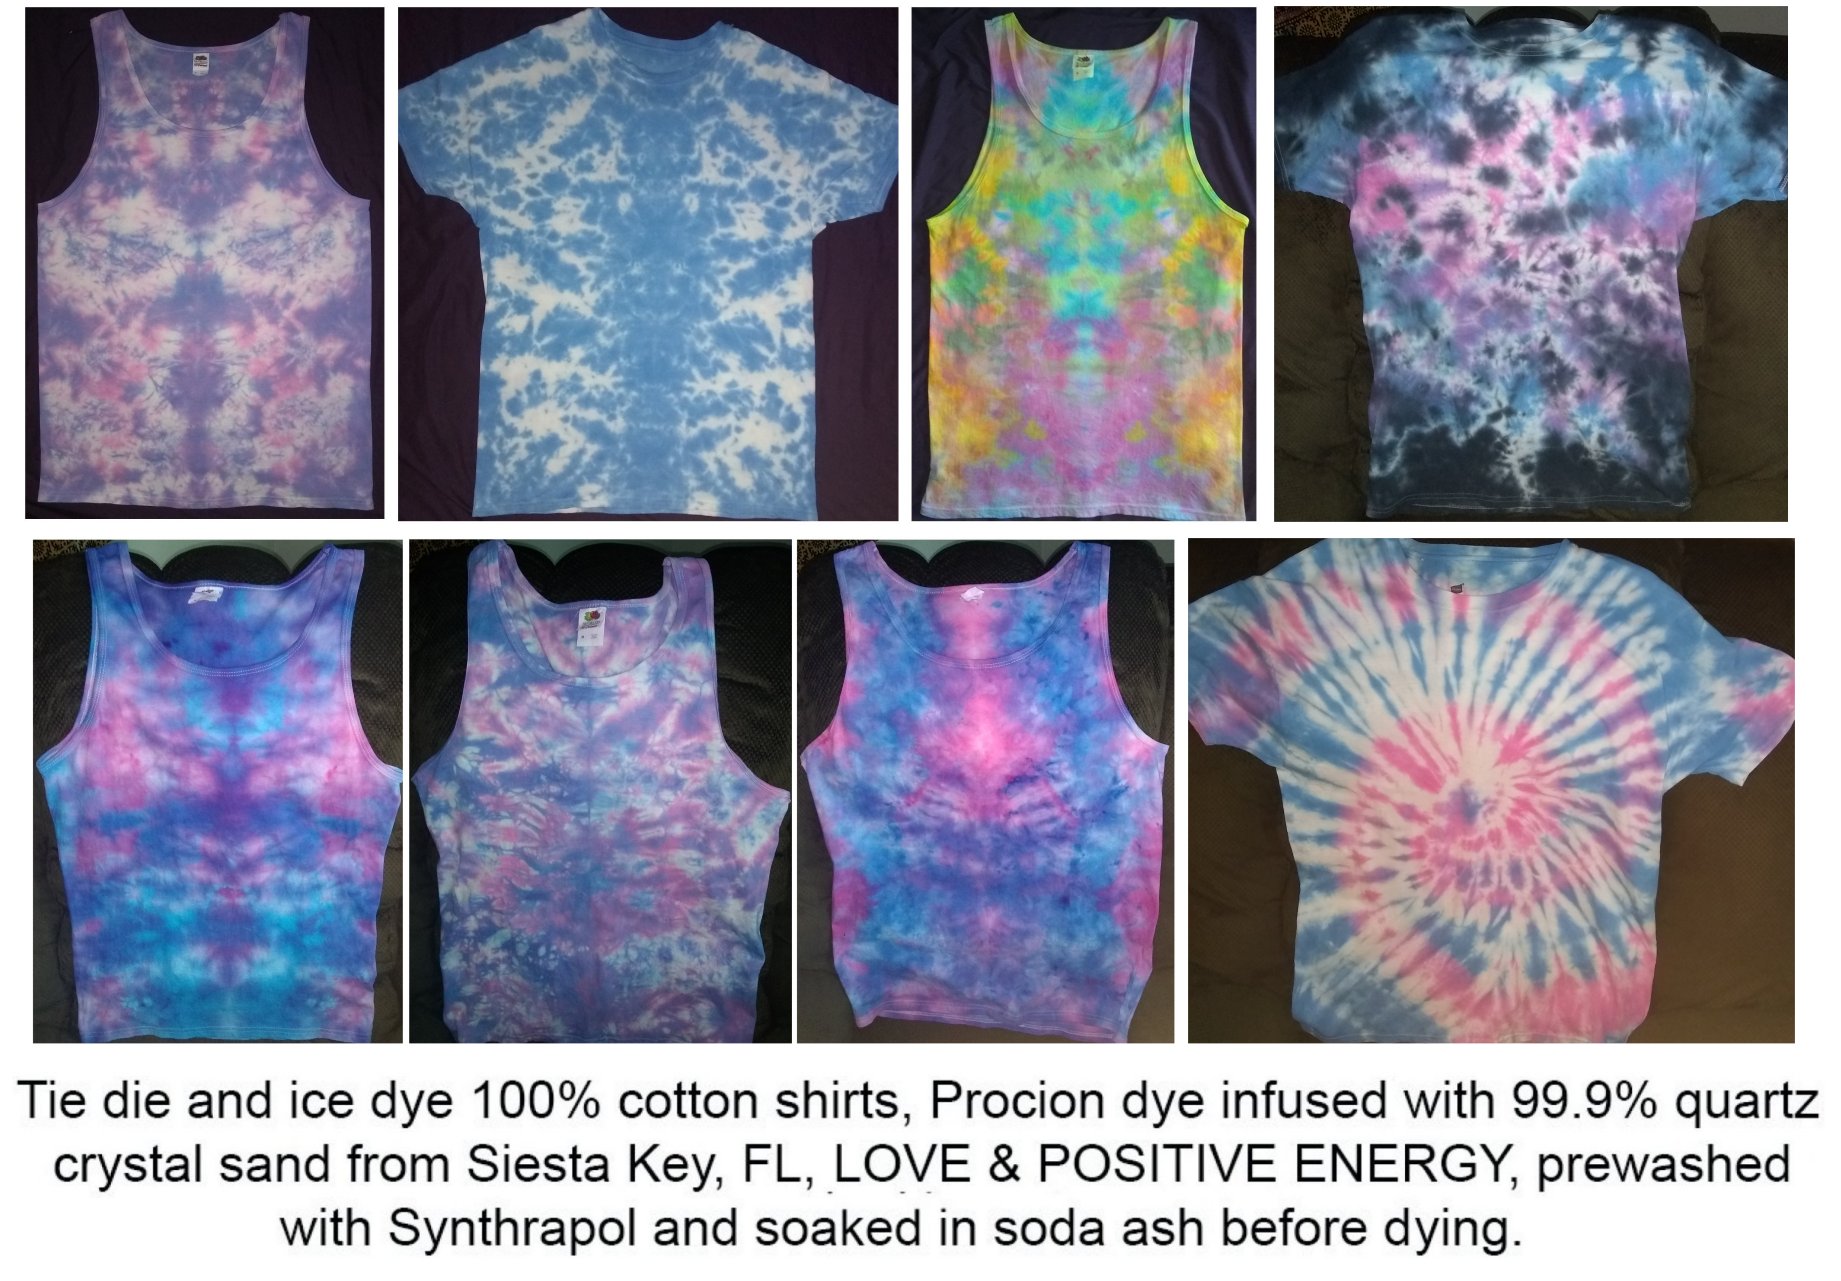 New Tie Dye Shirts August 12, 2019